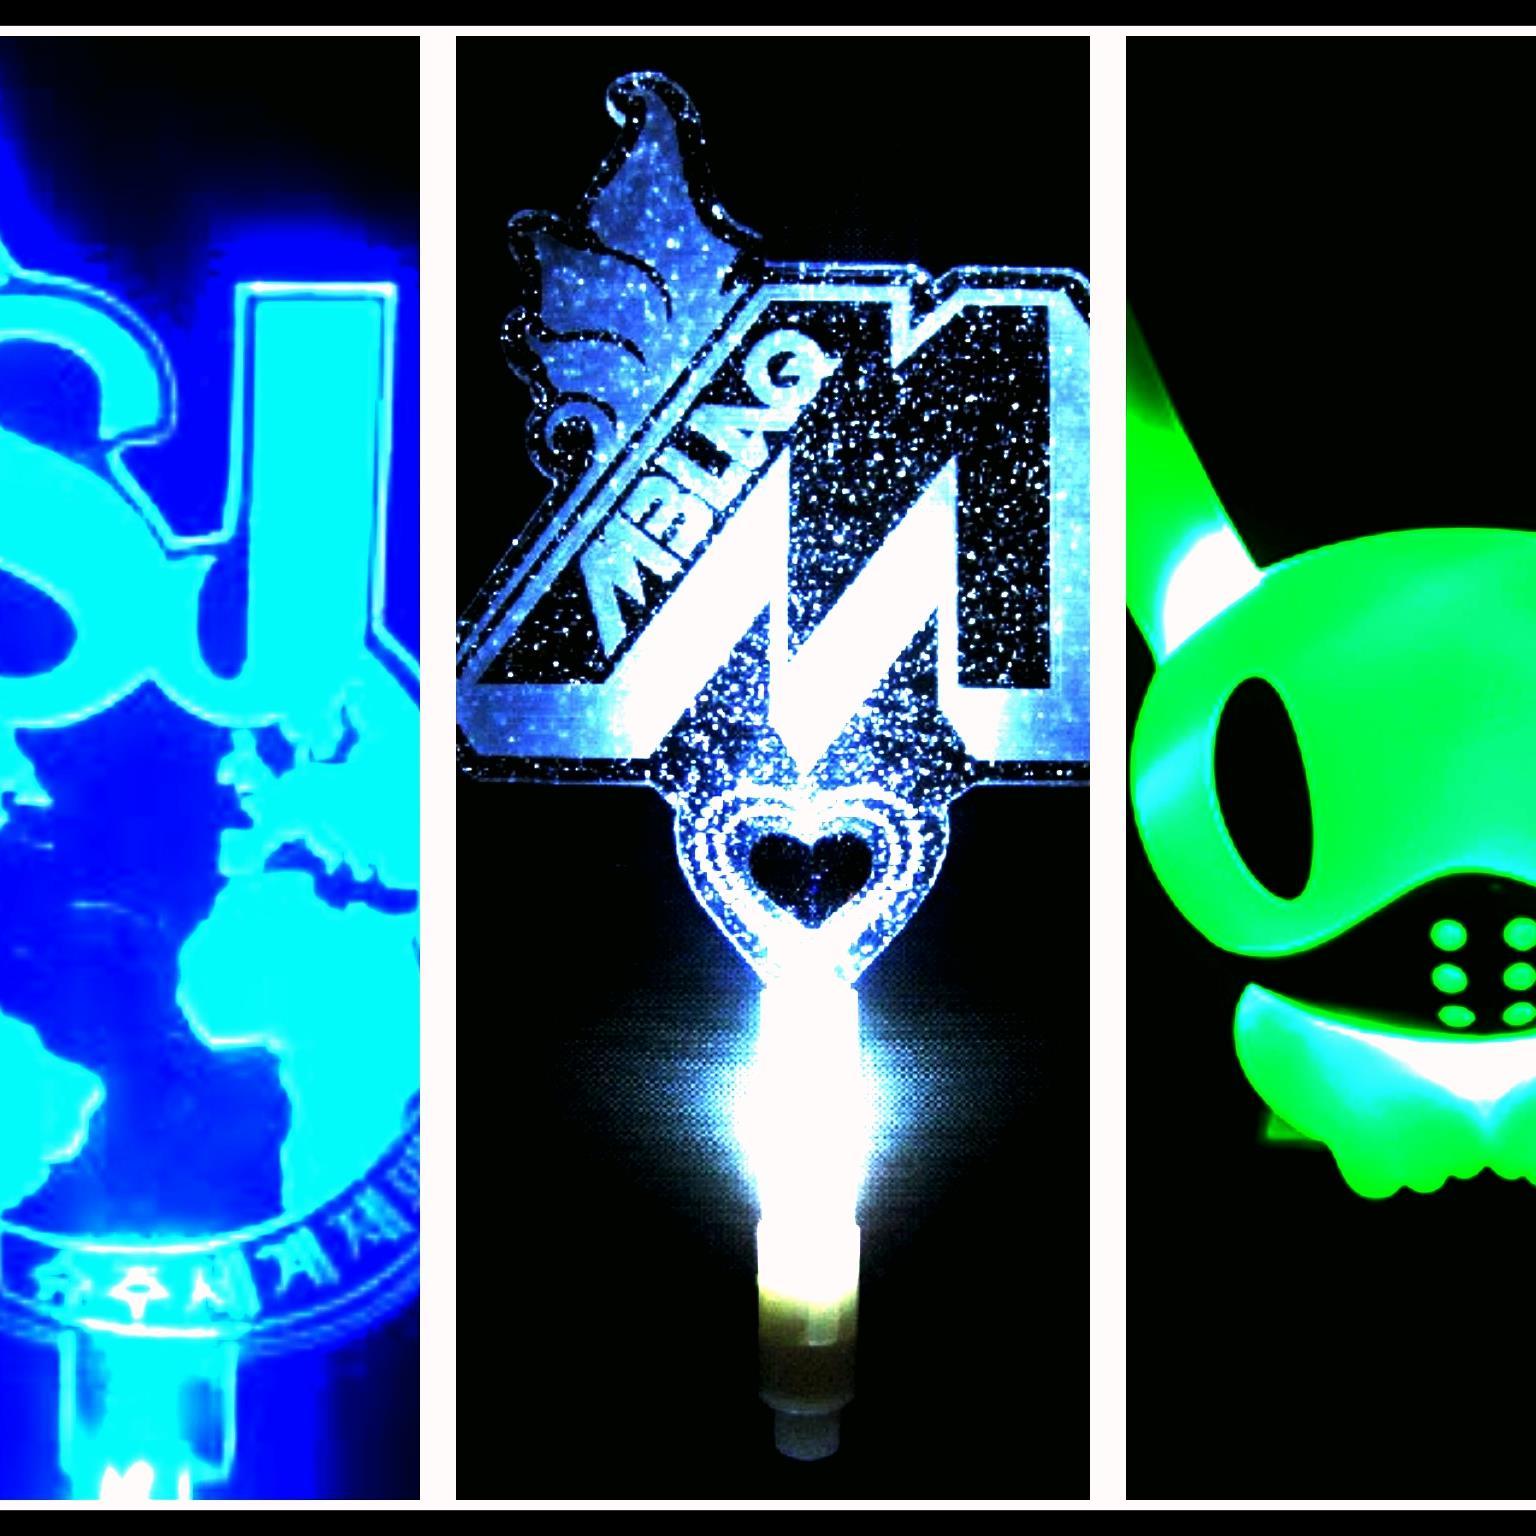 Follow us to get your daily dose of new updates about Super Junior, MBLAQ and B.A.P.
[MainAdmin: @itsmeyesmiler - Tine]